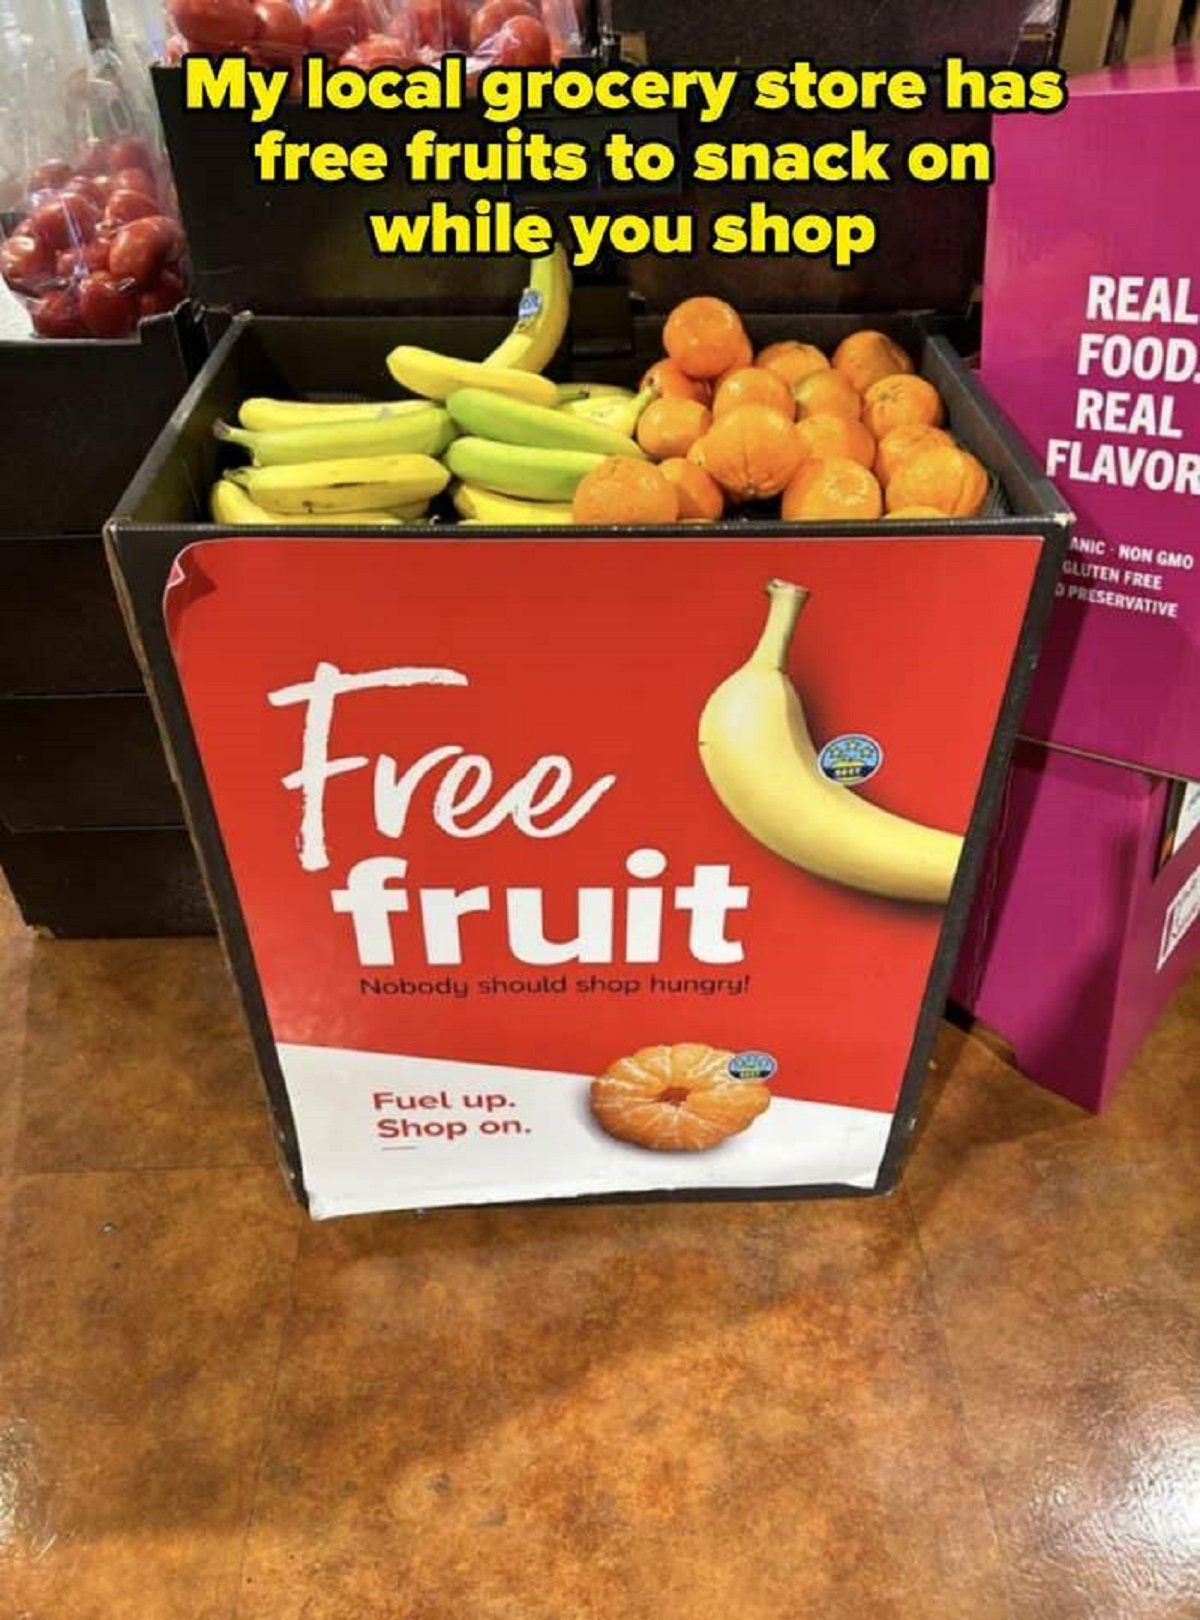 zucchini - My local grocery store has free fruits to snack on while you shop Free fruit Nobody should shop hunoru Fuel up. Shop on. Real Food Real Flavor